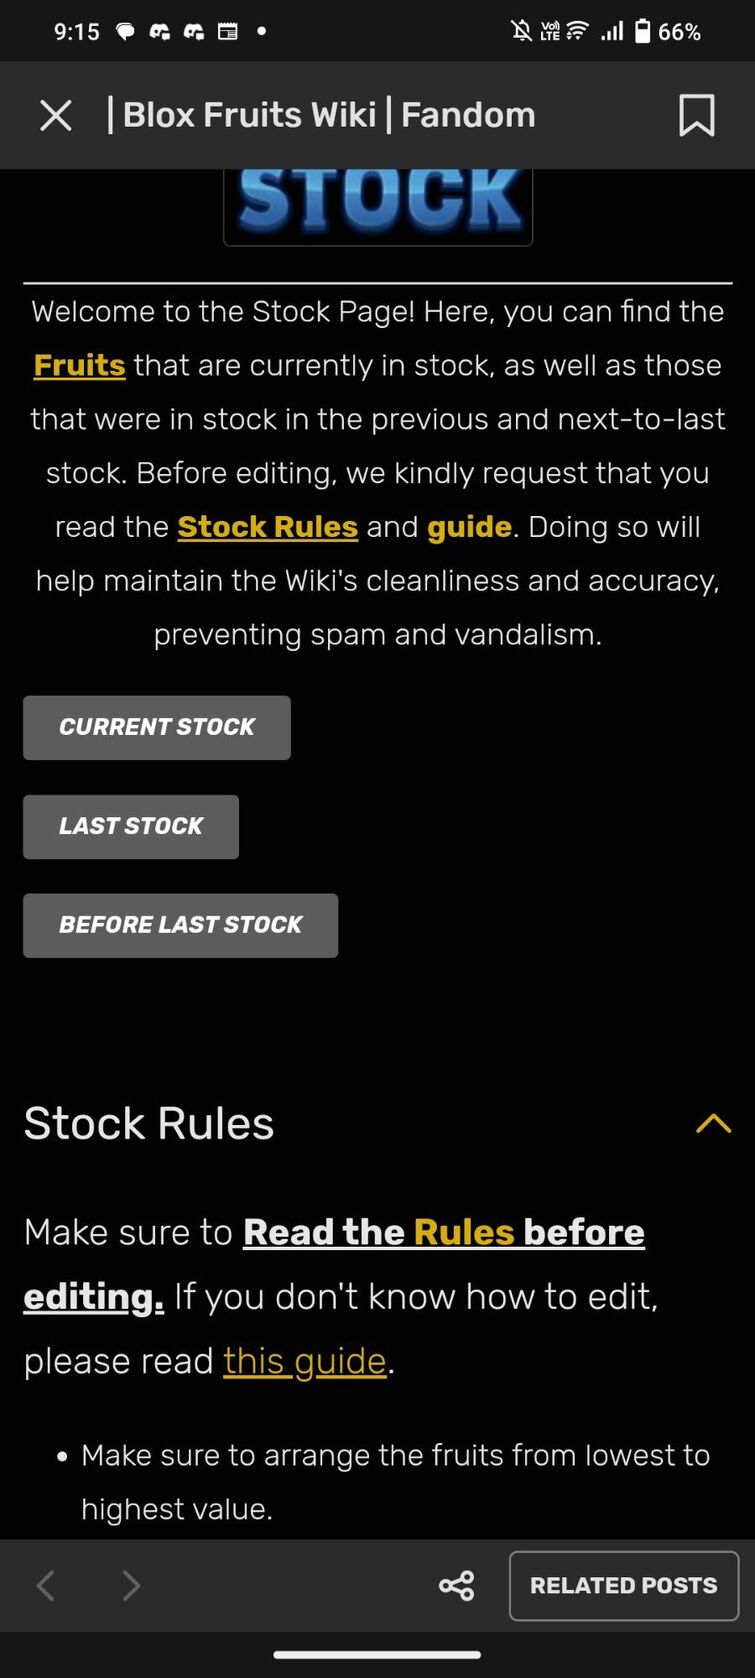 Why the stock page is not updated